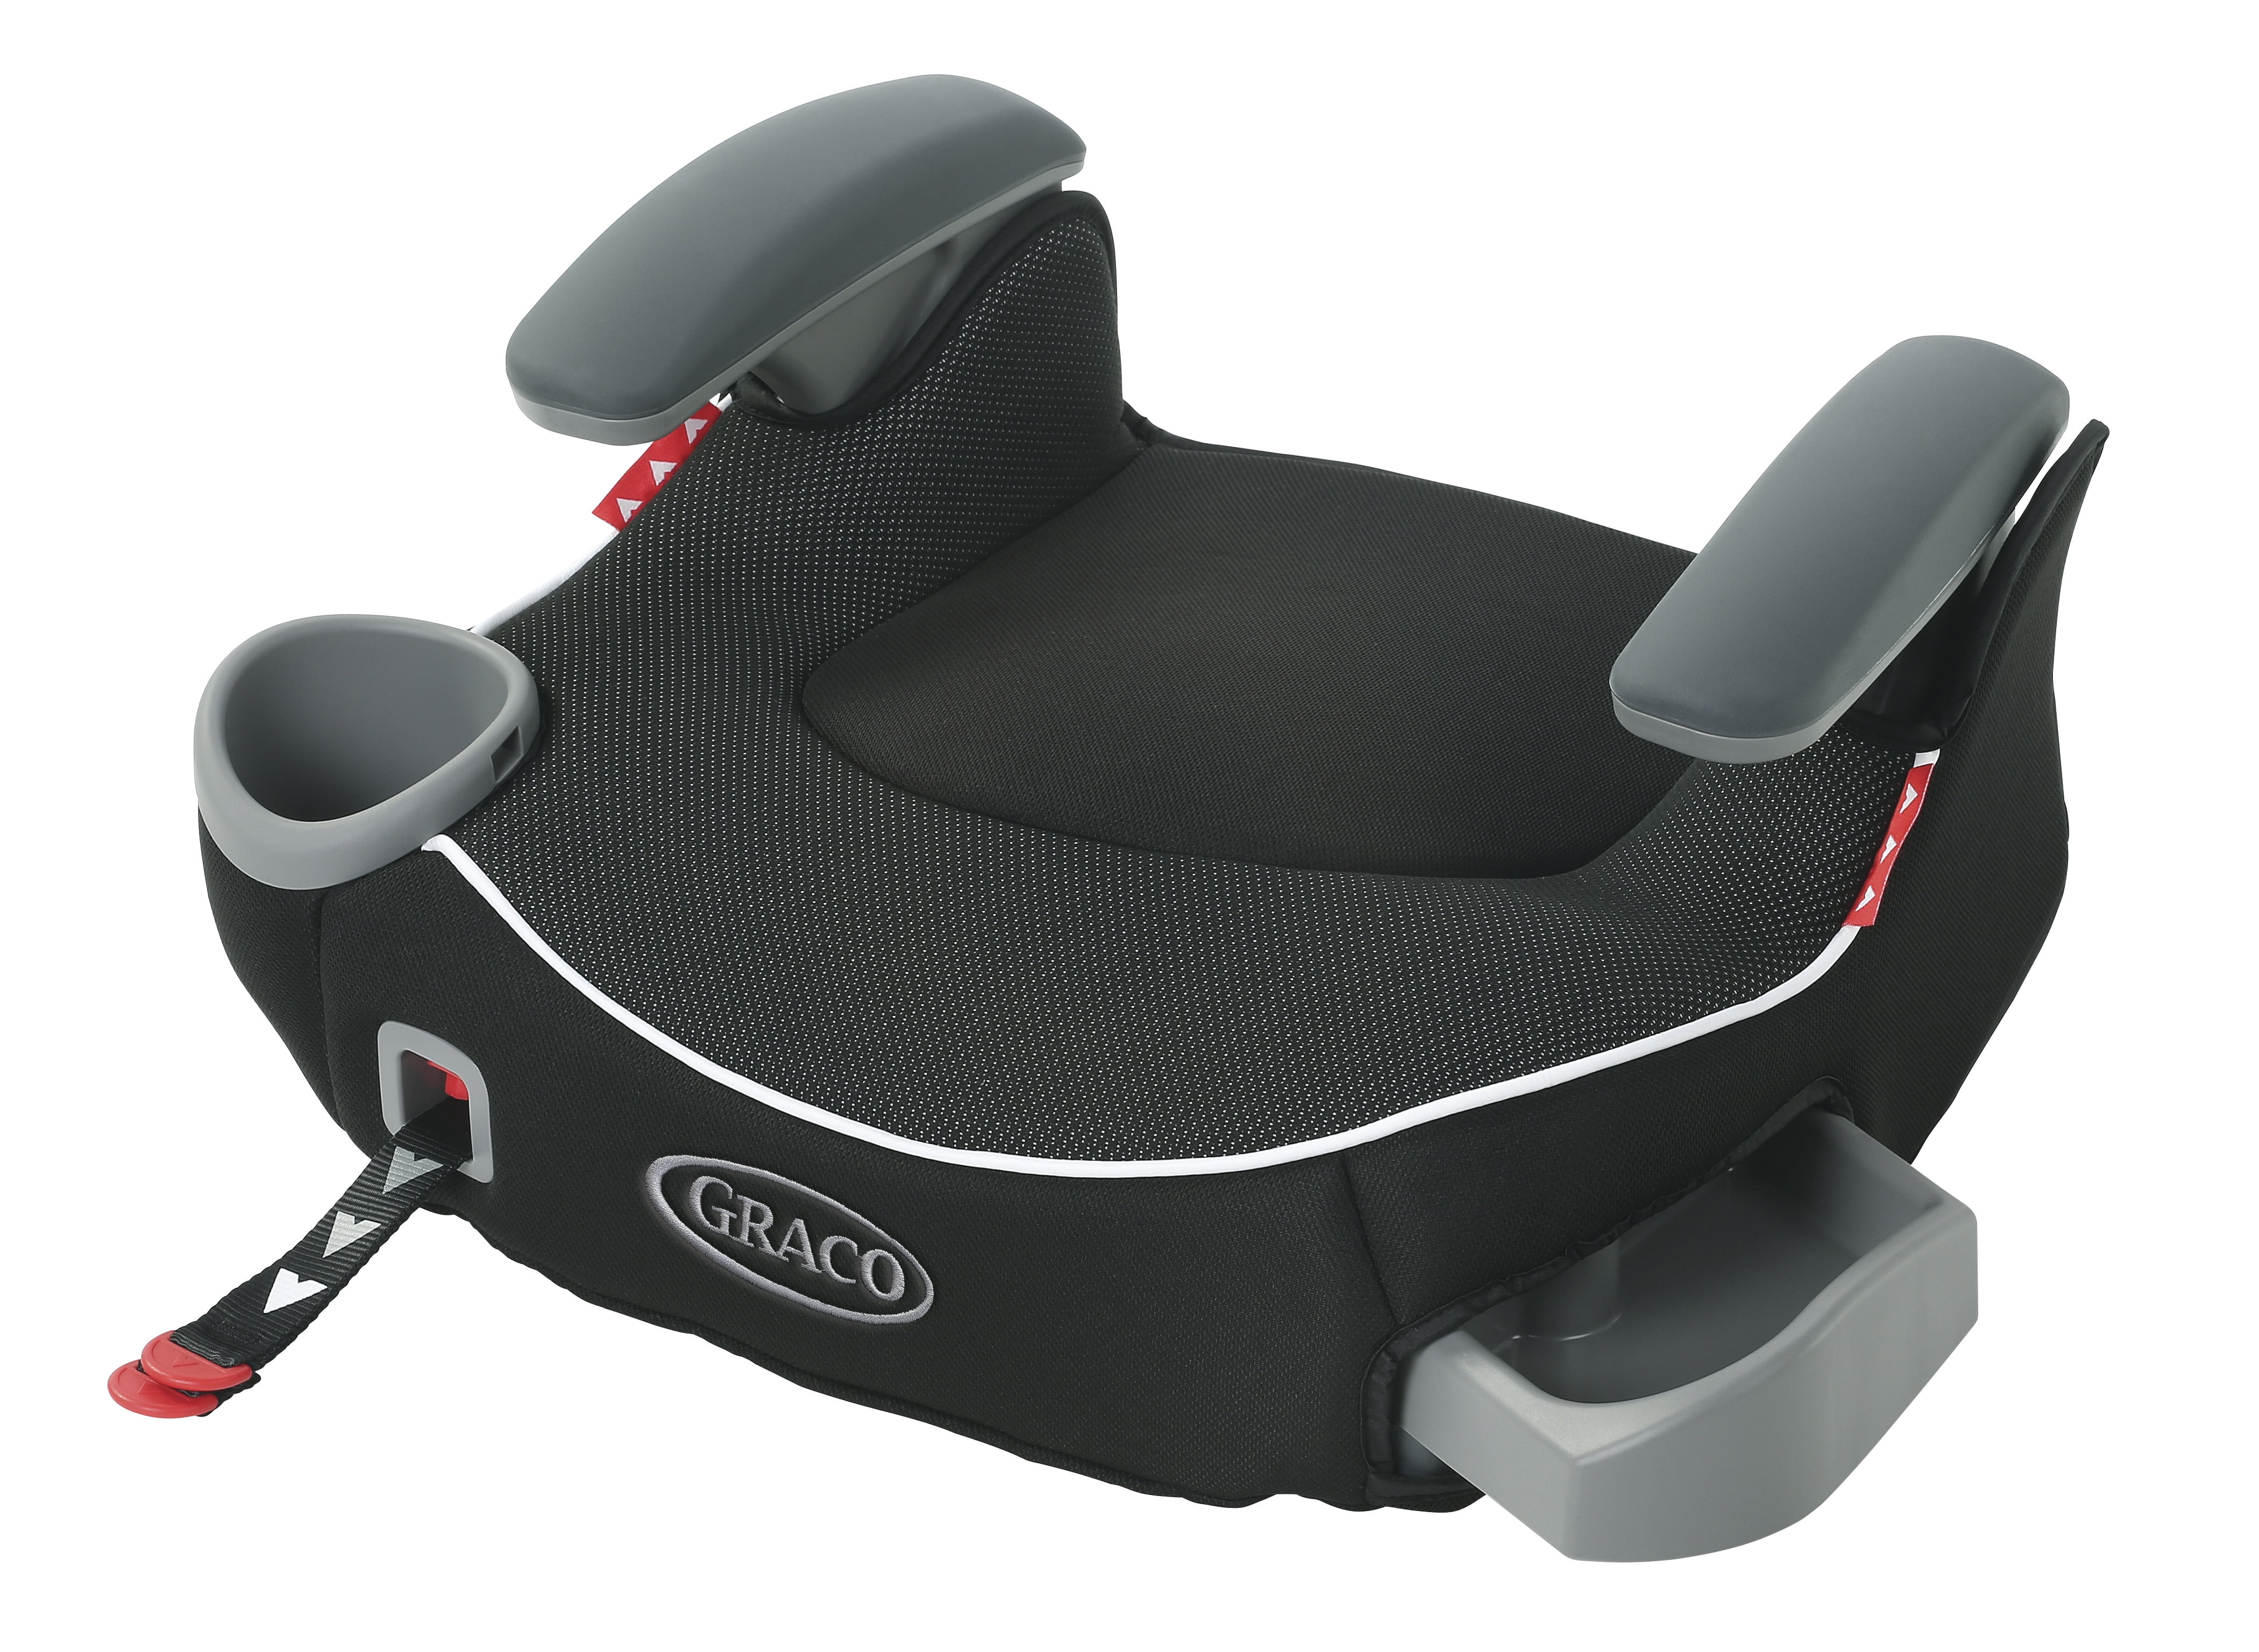 graco turbobooster lx reviews